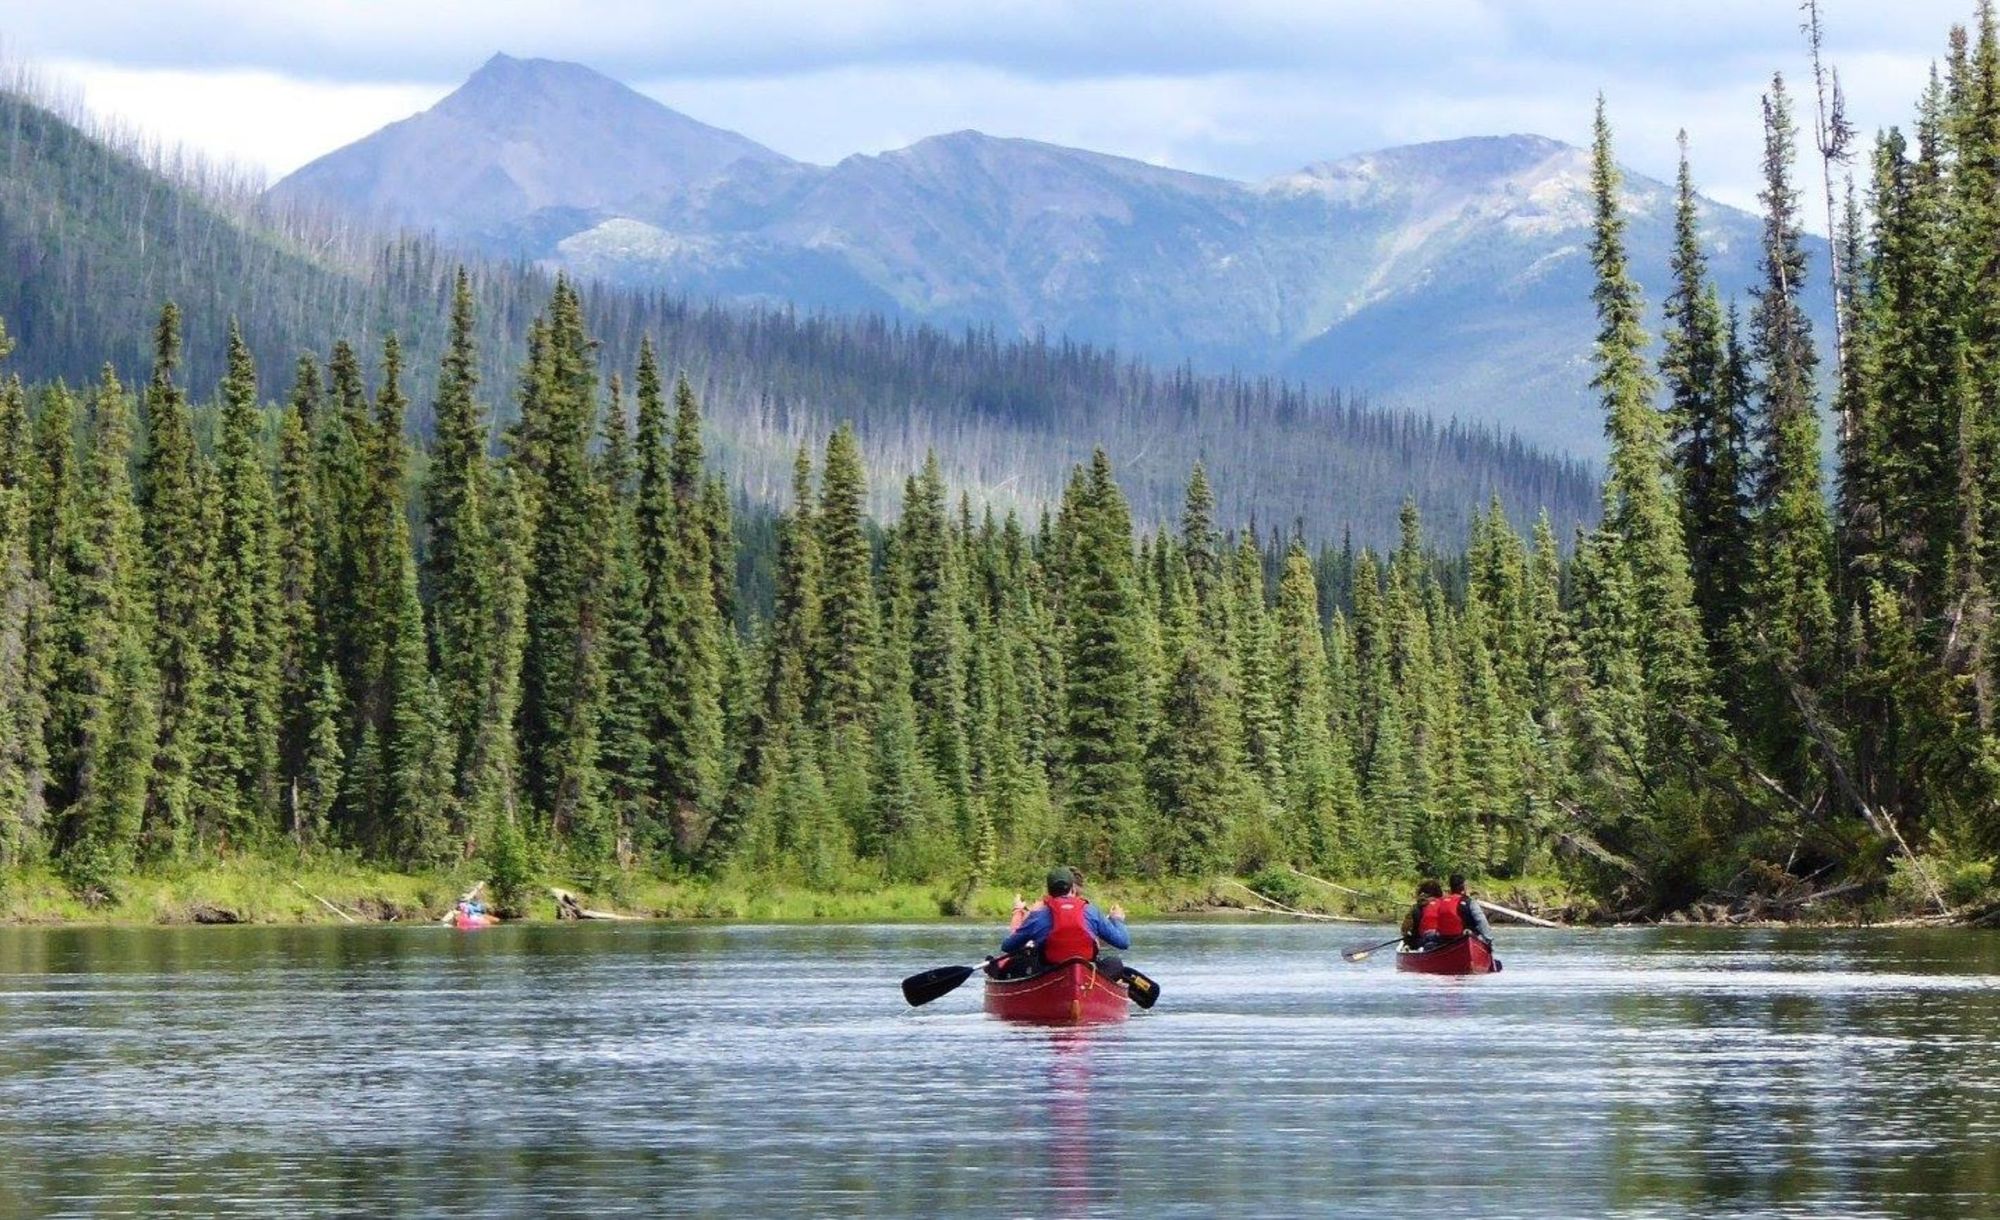 A group of canoeists on the Yukon River